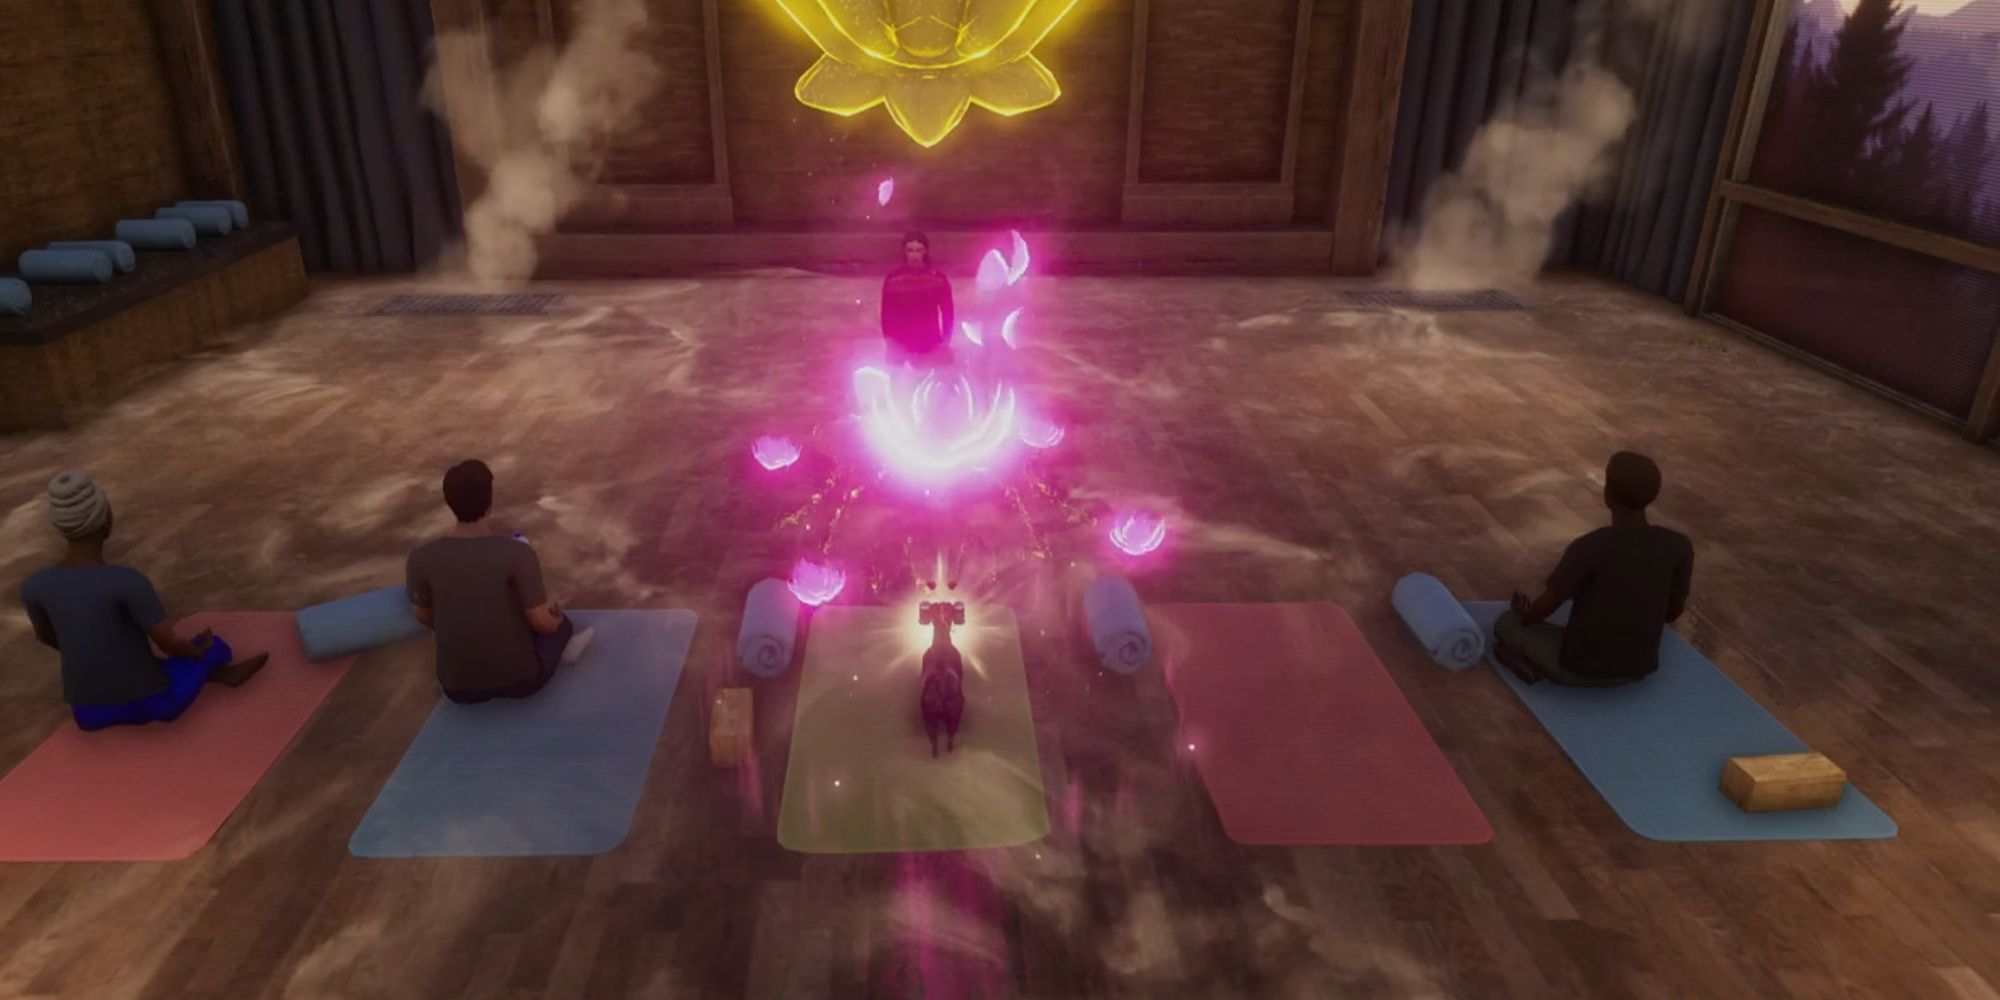 Goat stands on mat during yoga session in Goat Simulator 3